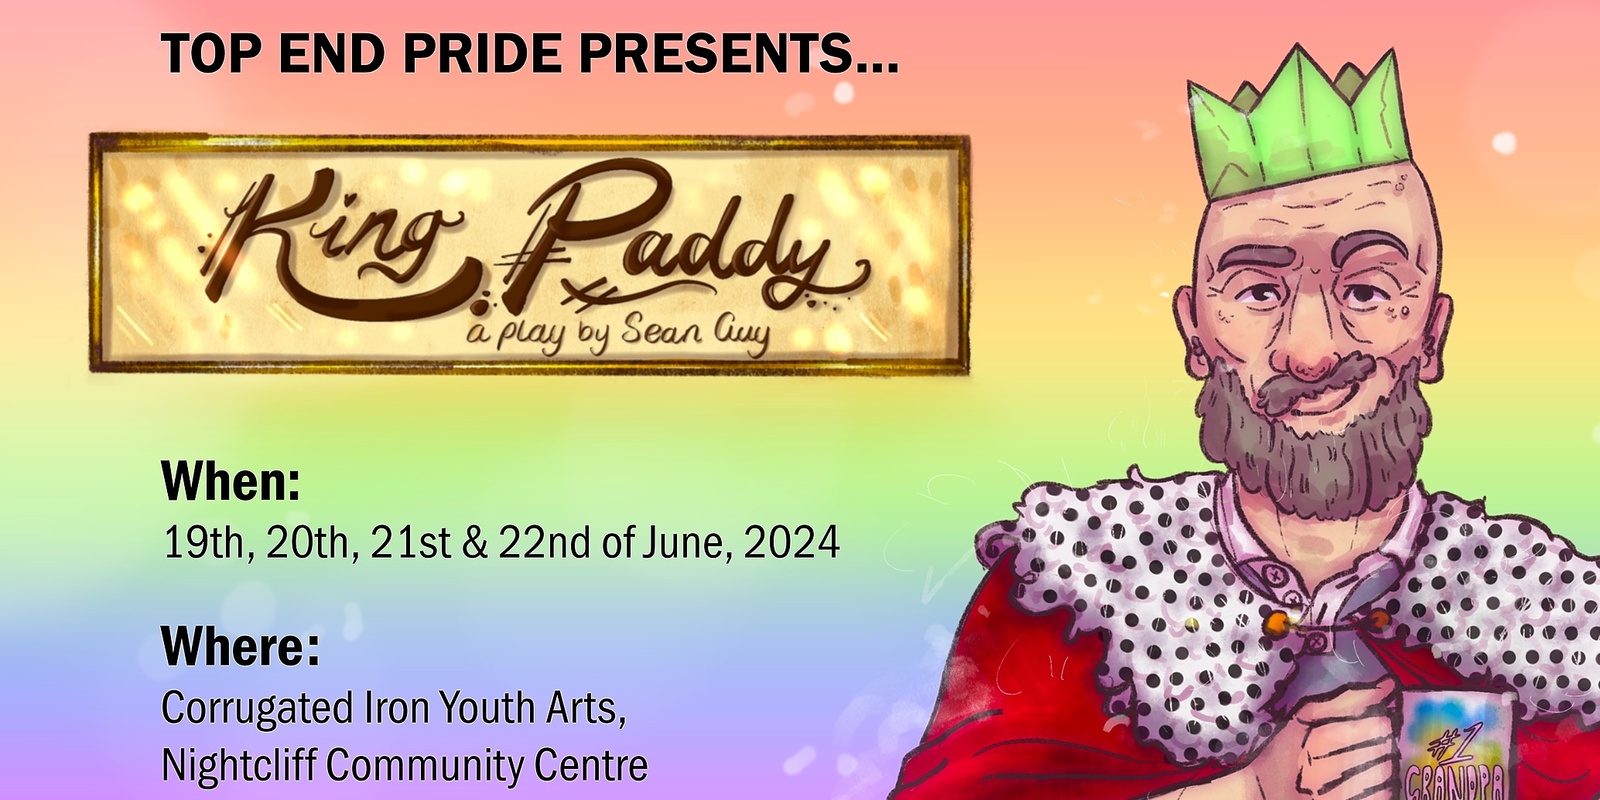 Banner image for Darwin Pride 2024 – King Paddy at Corrugated Iron